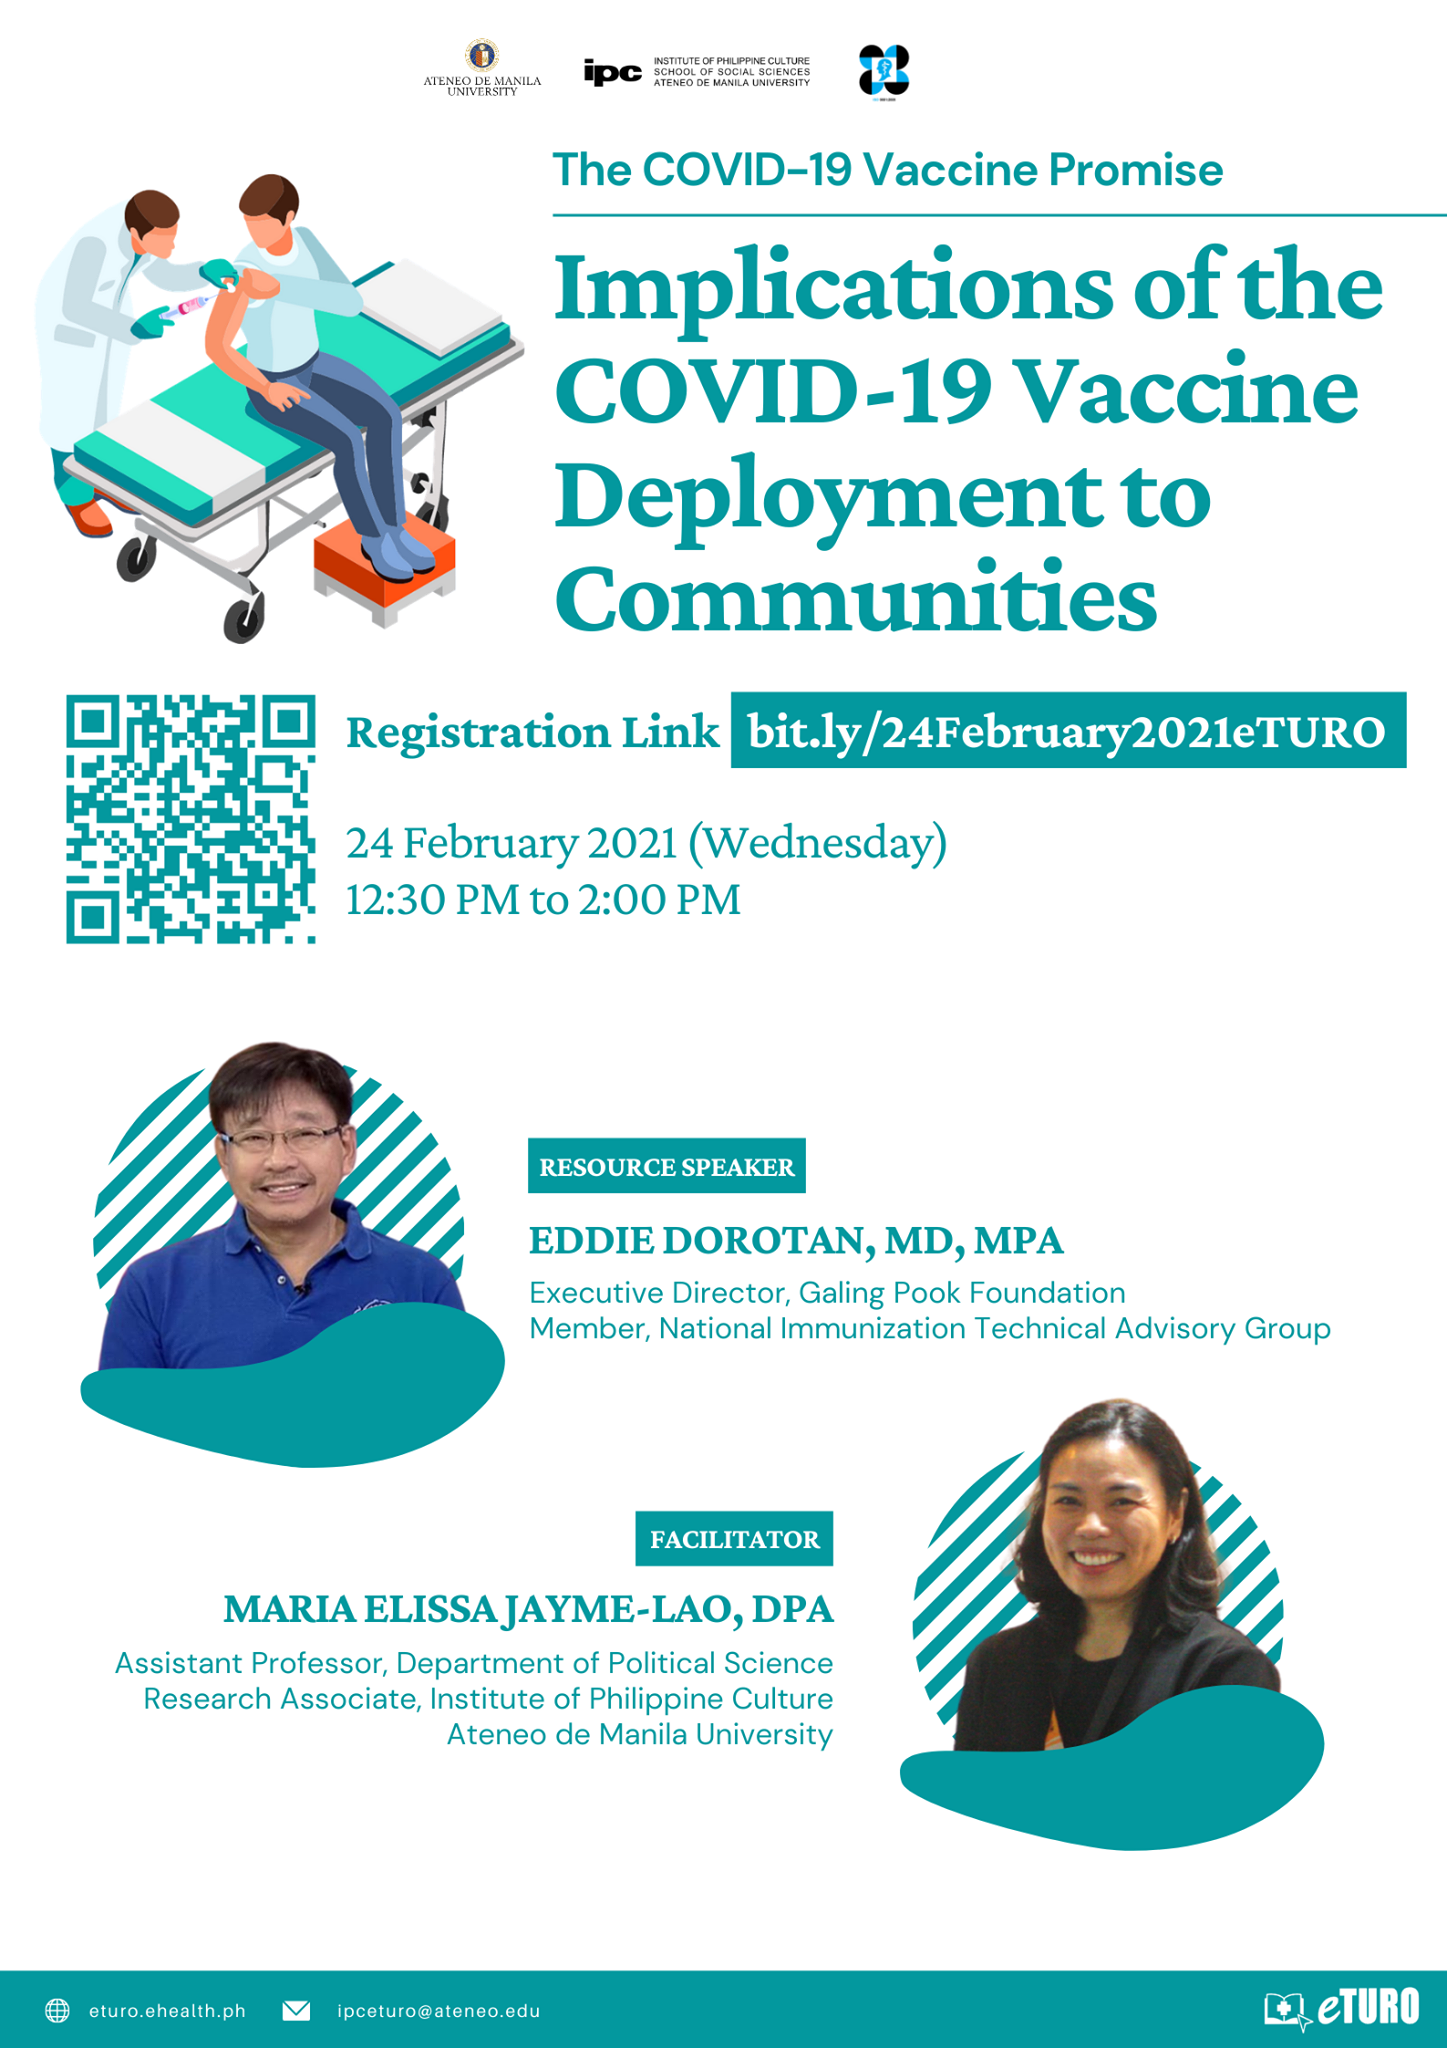 Implications of the COVID-19 Vaccine Deployment to Communities